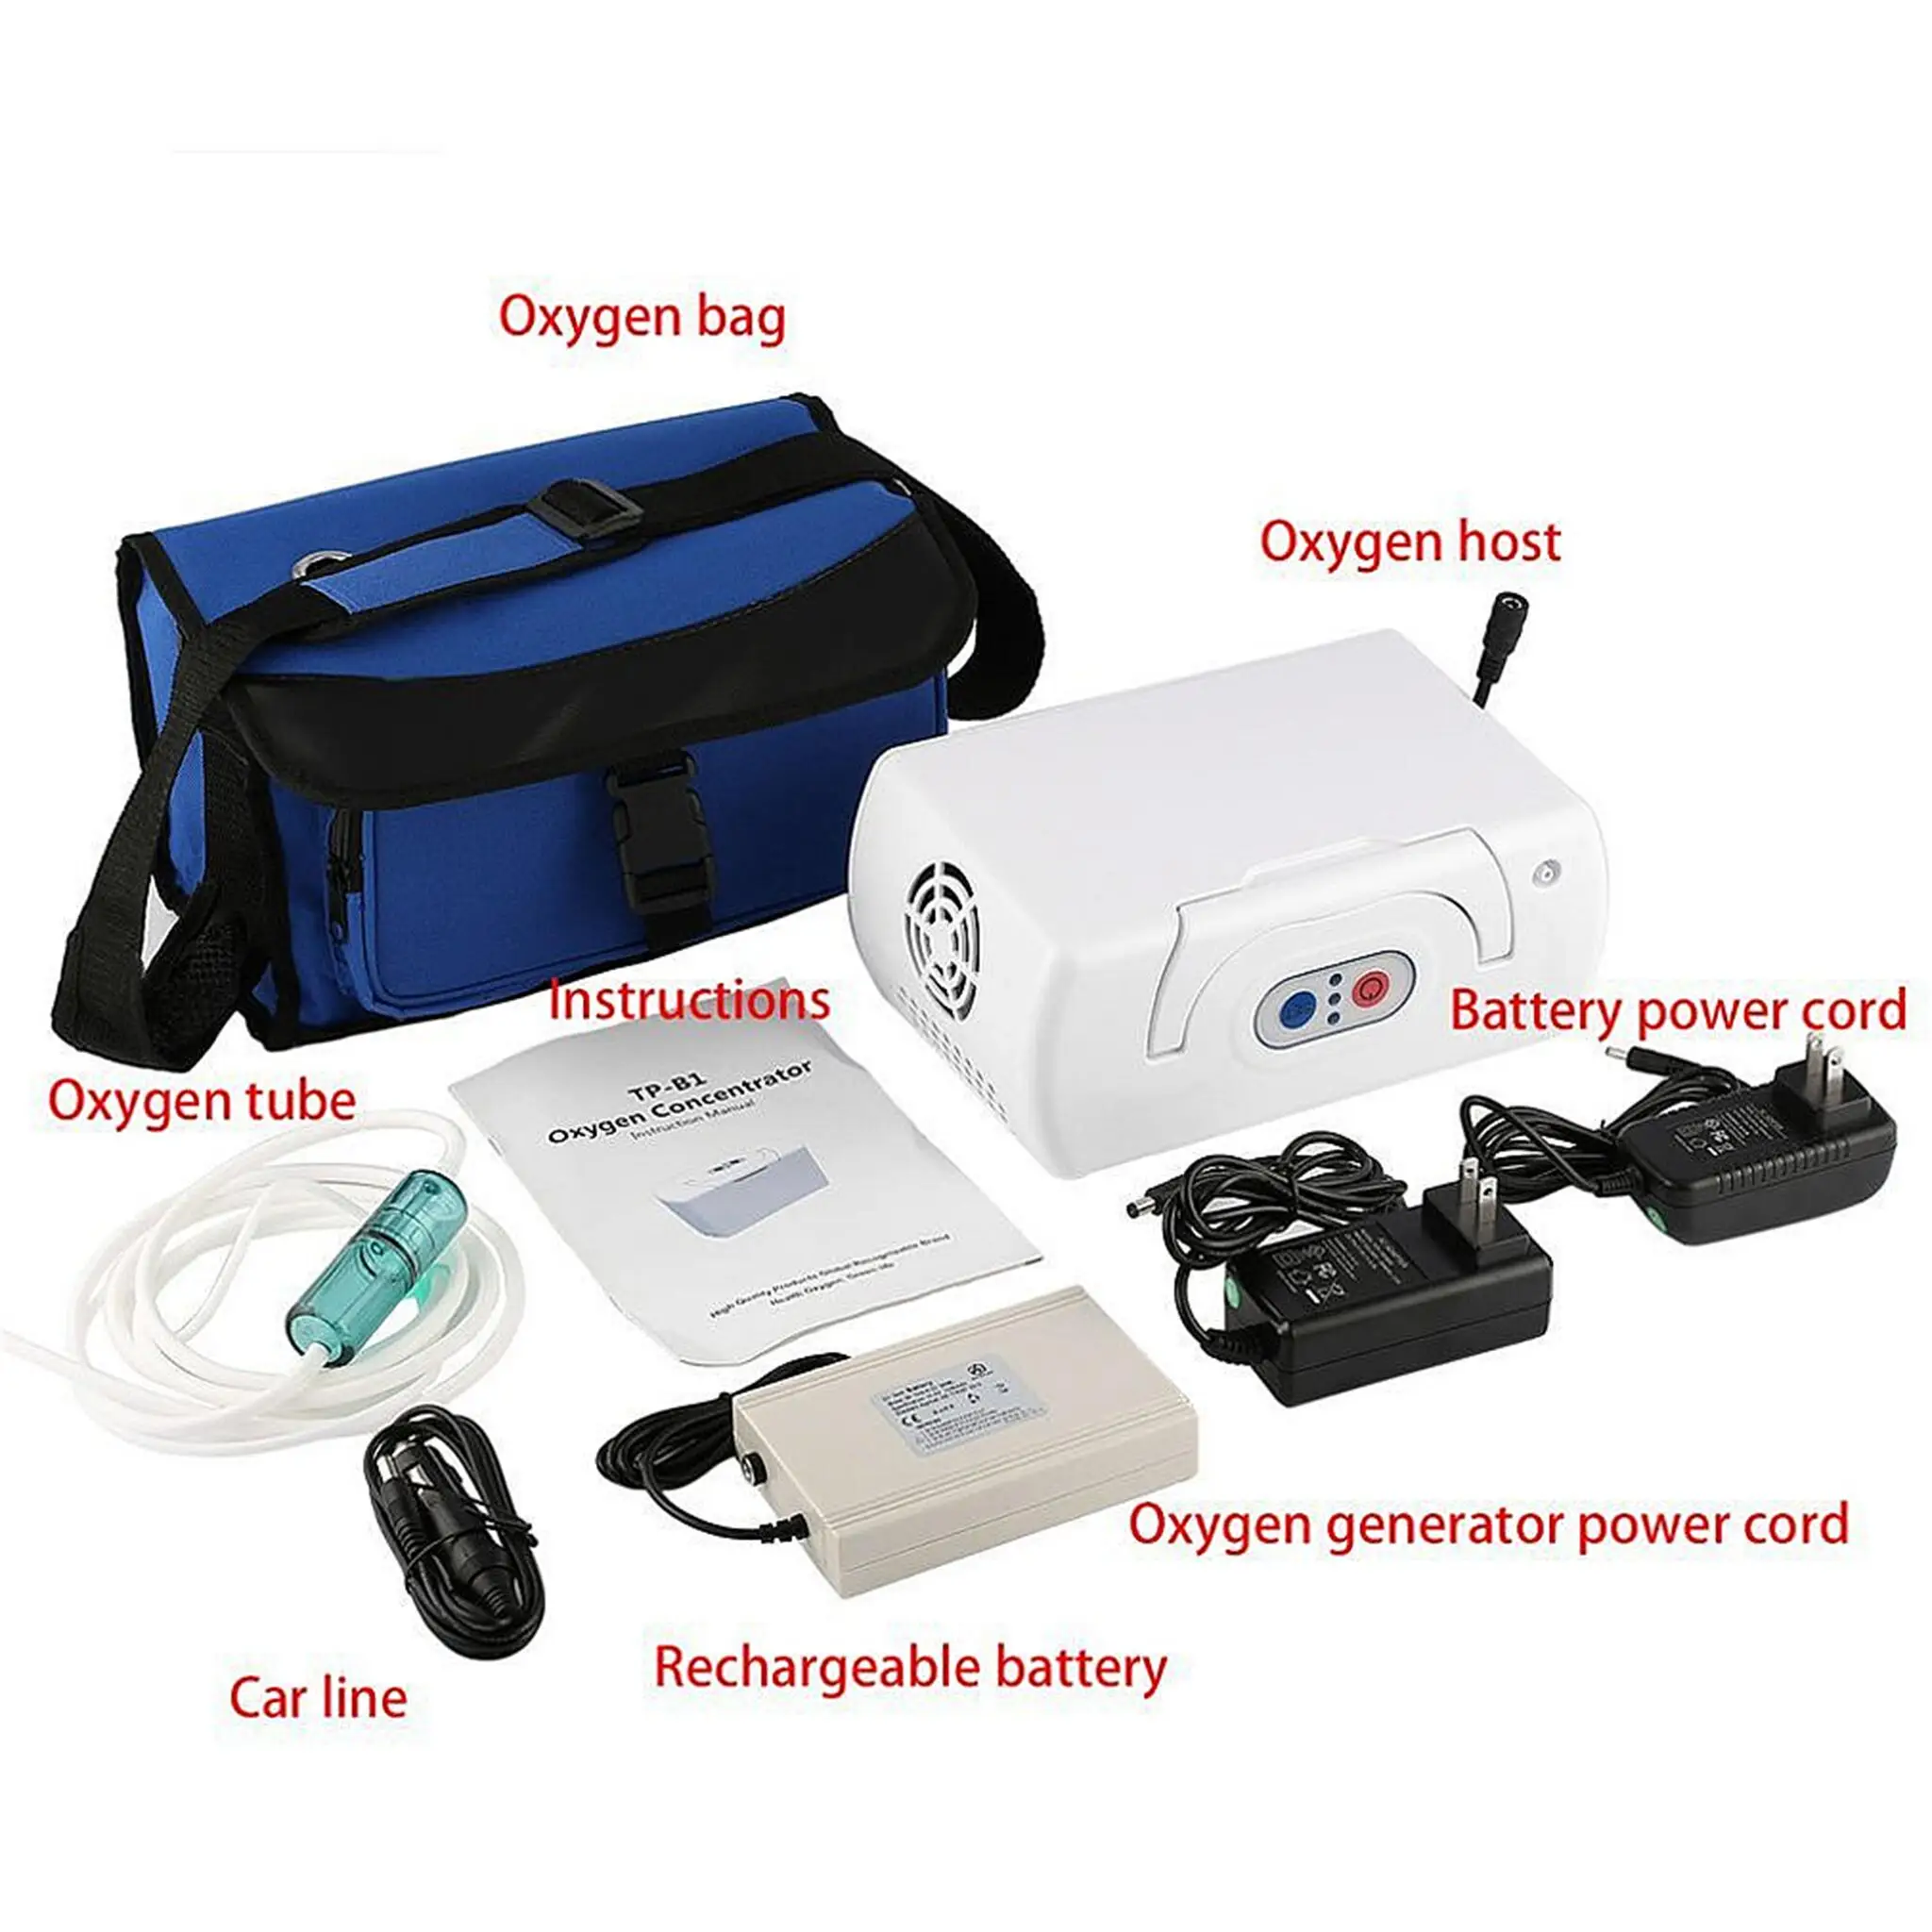 

Outdoor Portable Oxygen Concentrator Vehicle Oxygen Bar Generator Household Bar 24 hours Continuous Oxygen Inhaler